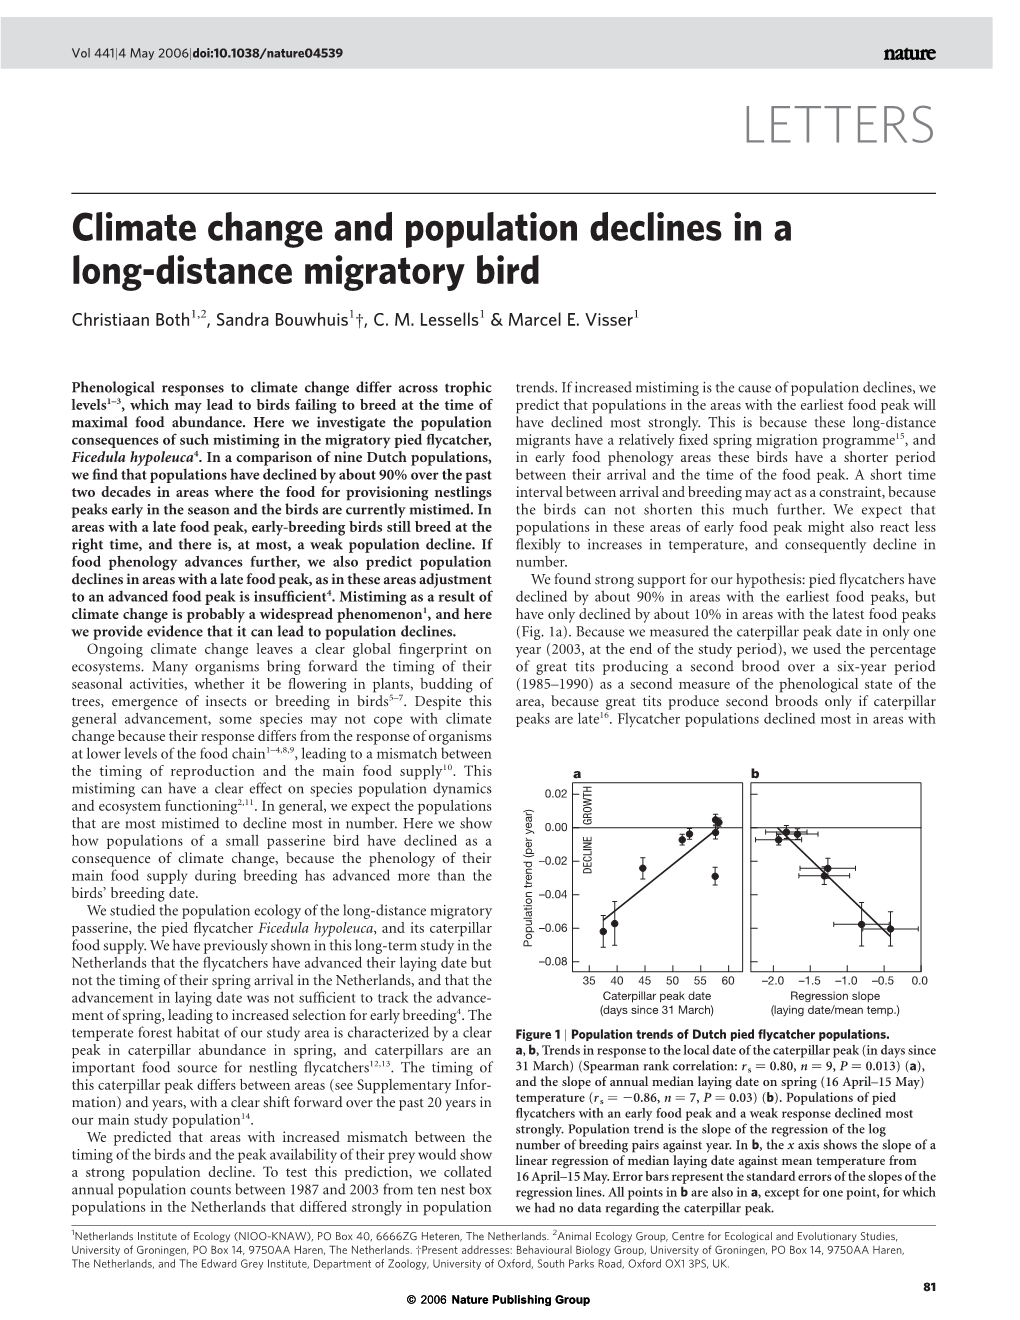 Climate Change and Population Declines in a Long-Distance Migratory Bird